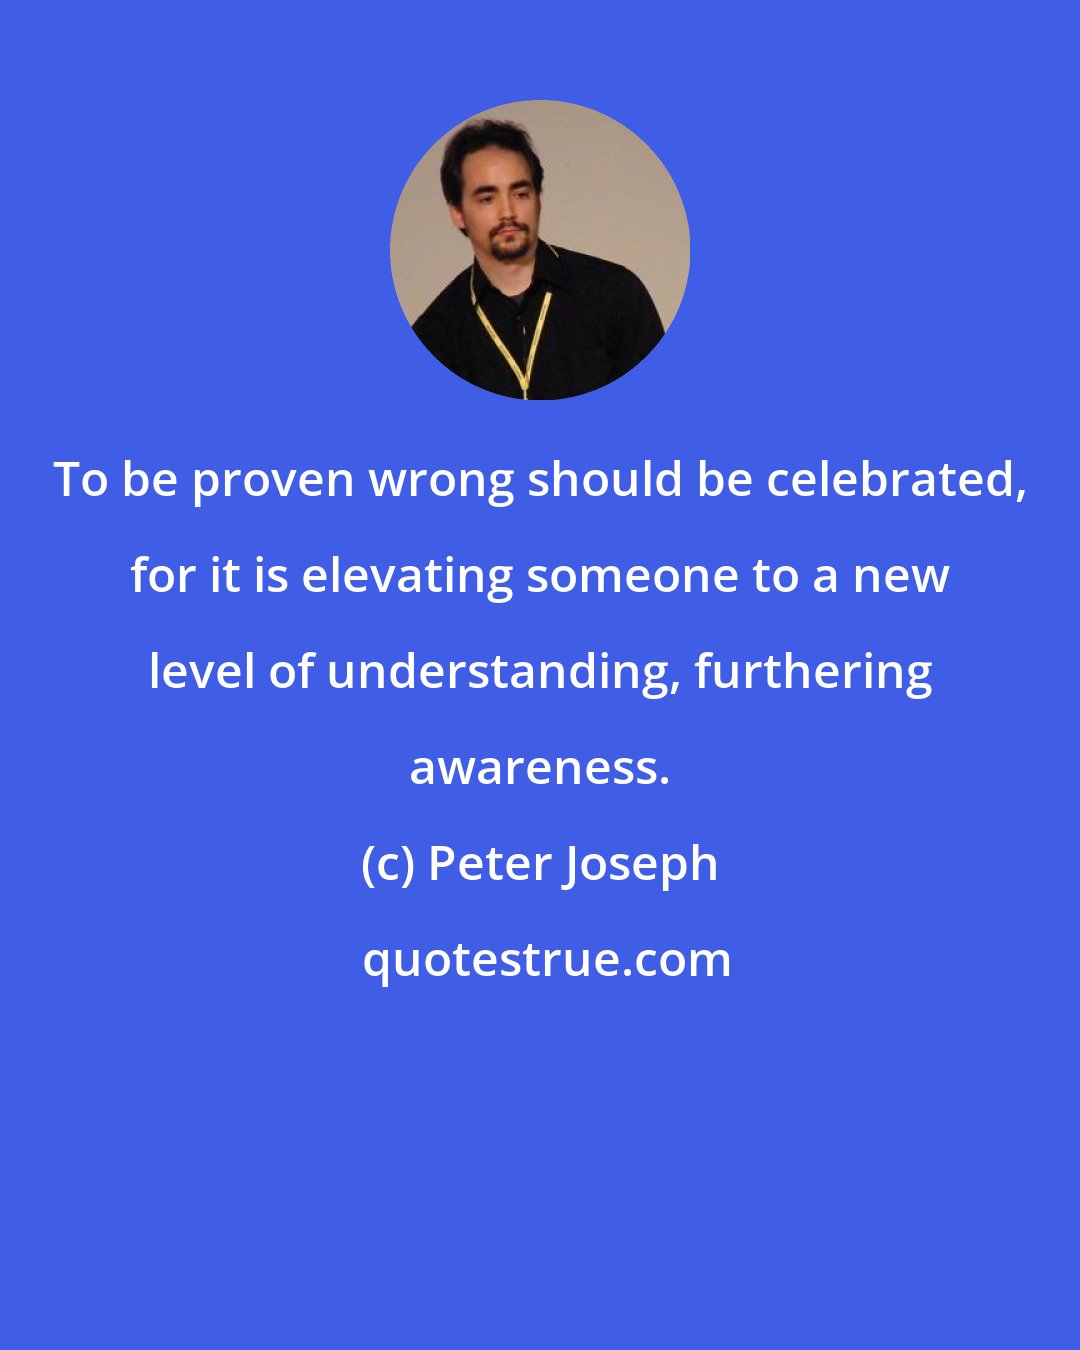 Peter Joseph: To be proven wrong should be celebrated, for it is elevating someone to a new level of understanding, furthering awareness.